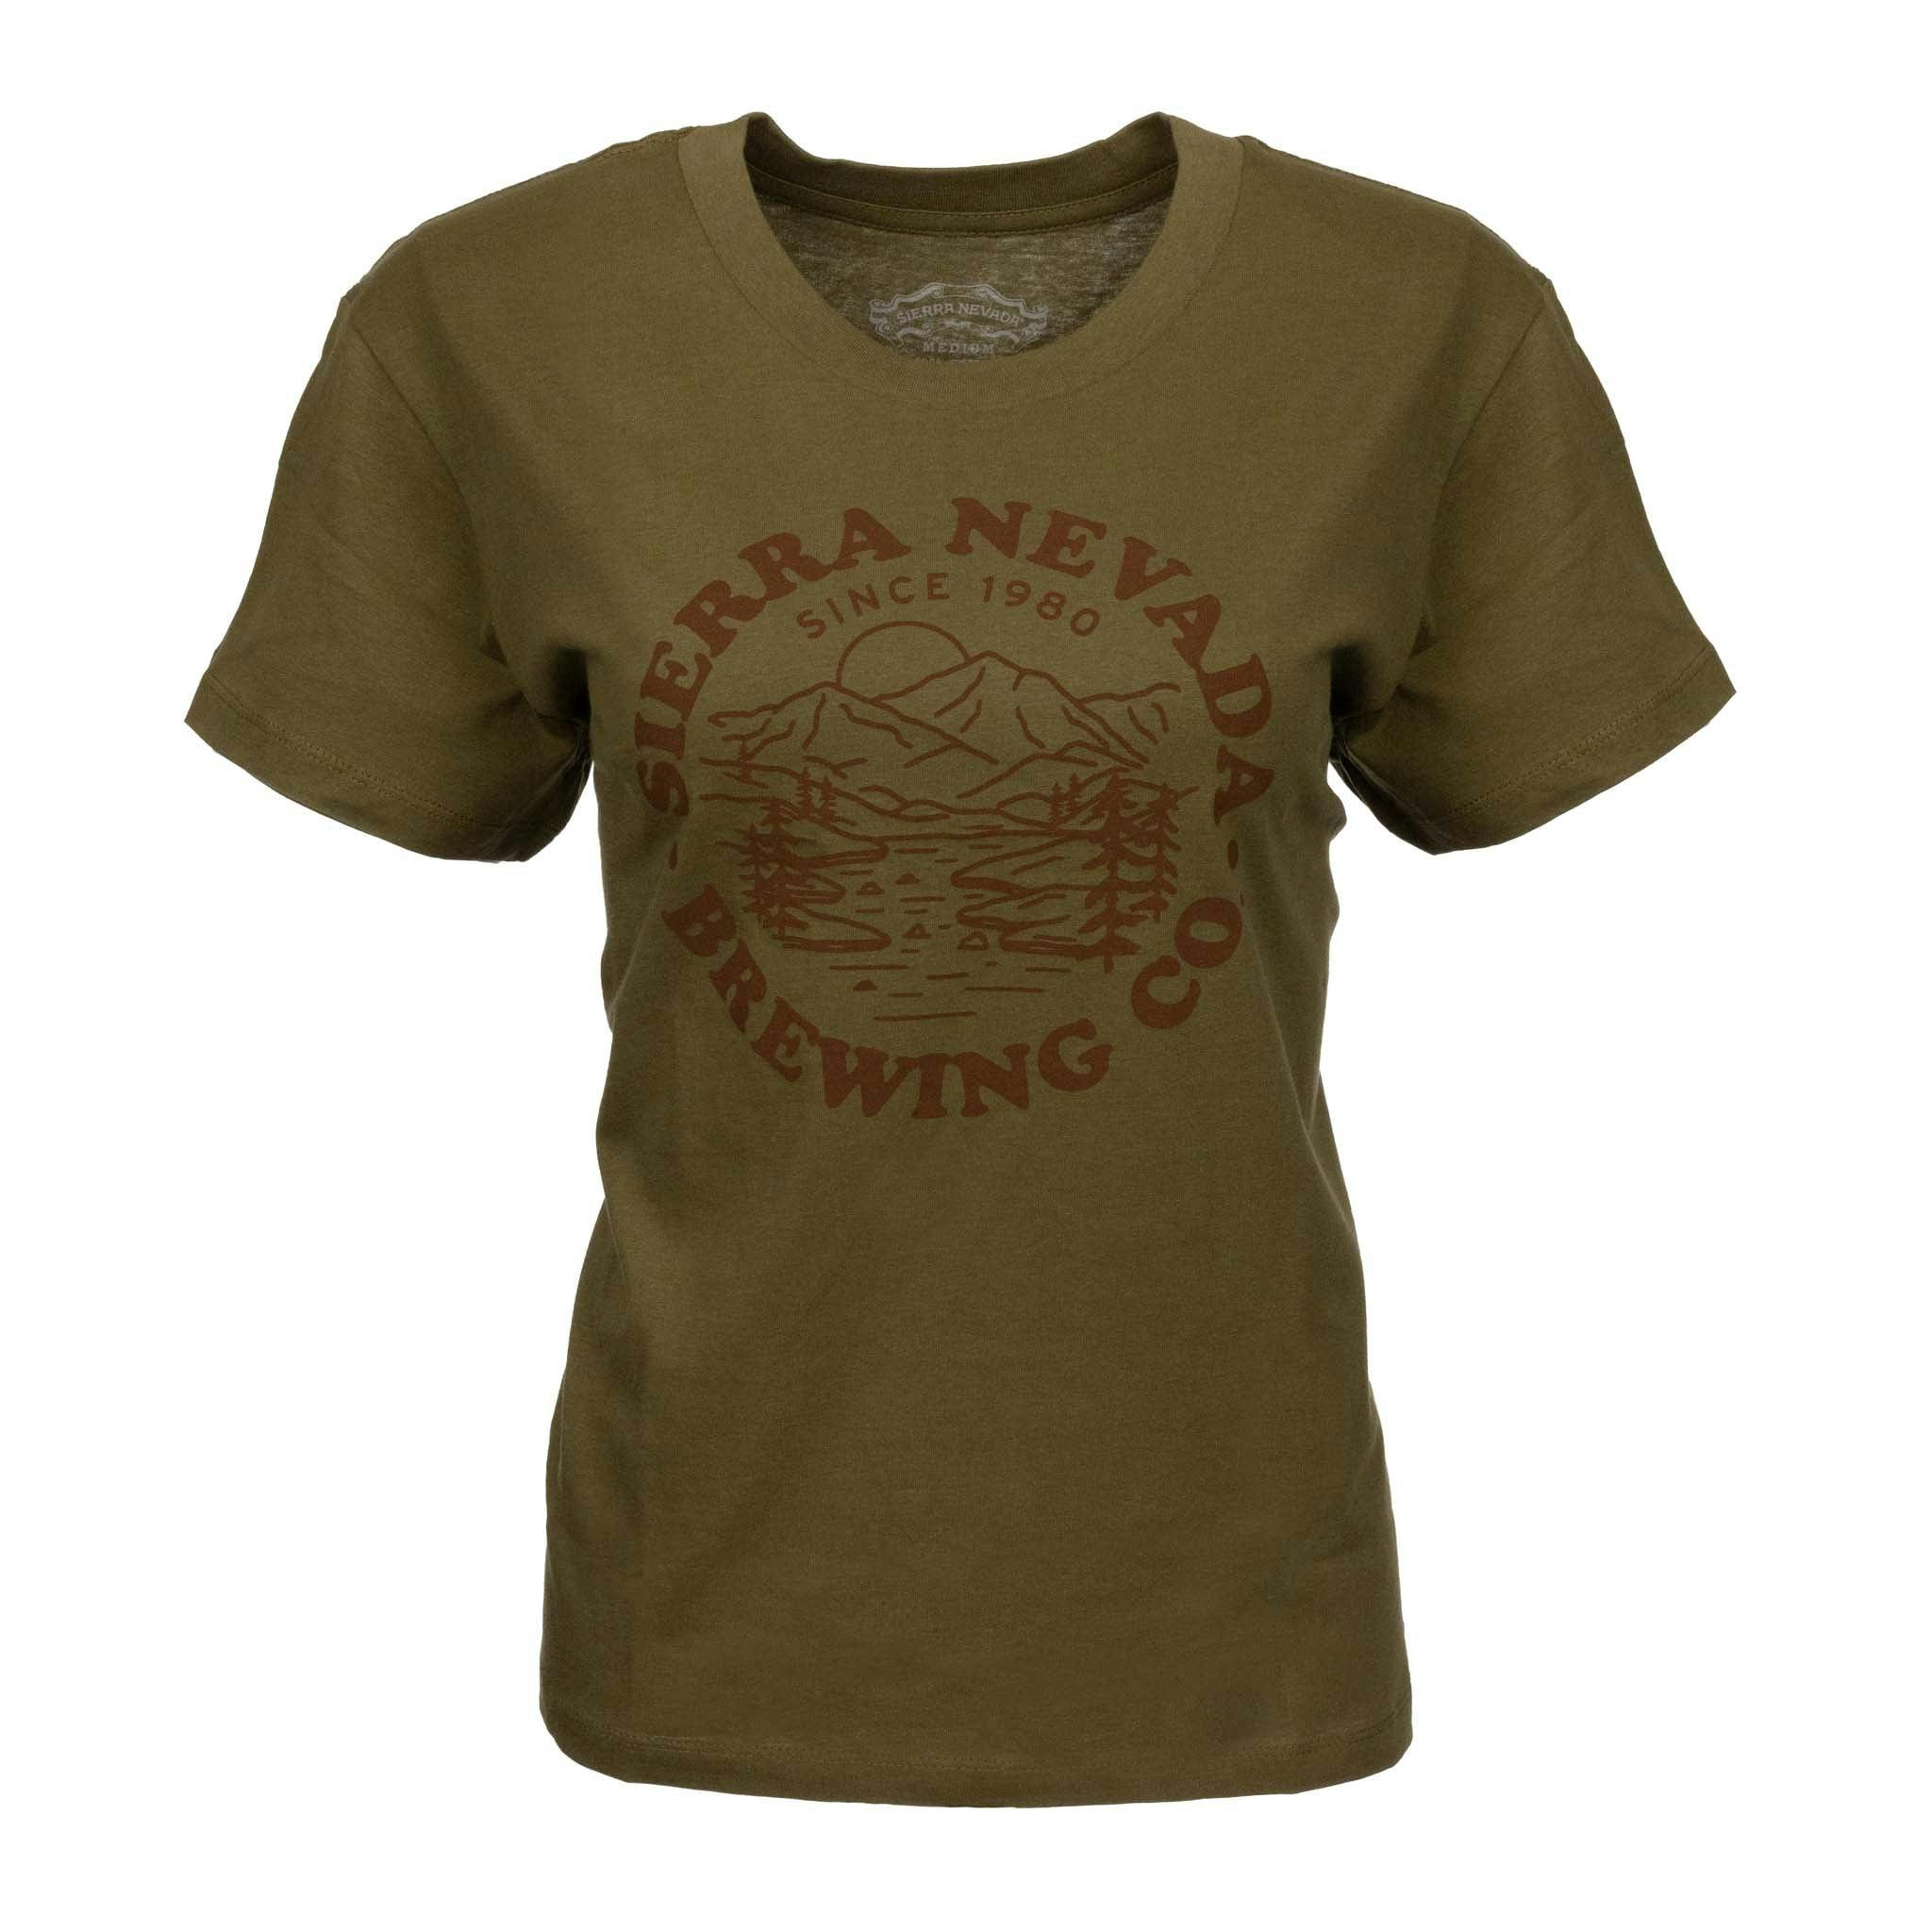 Sierra Nevada Women's Mountain Circle T-Shirt Olive Branch - Front view